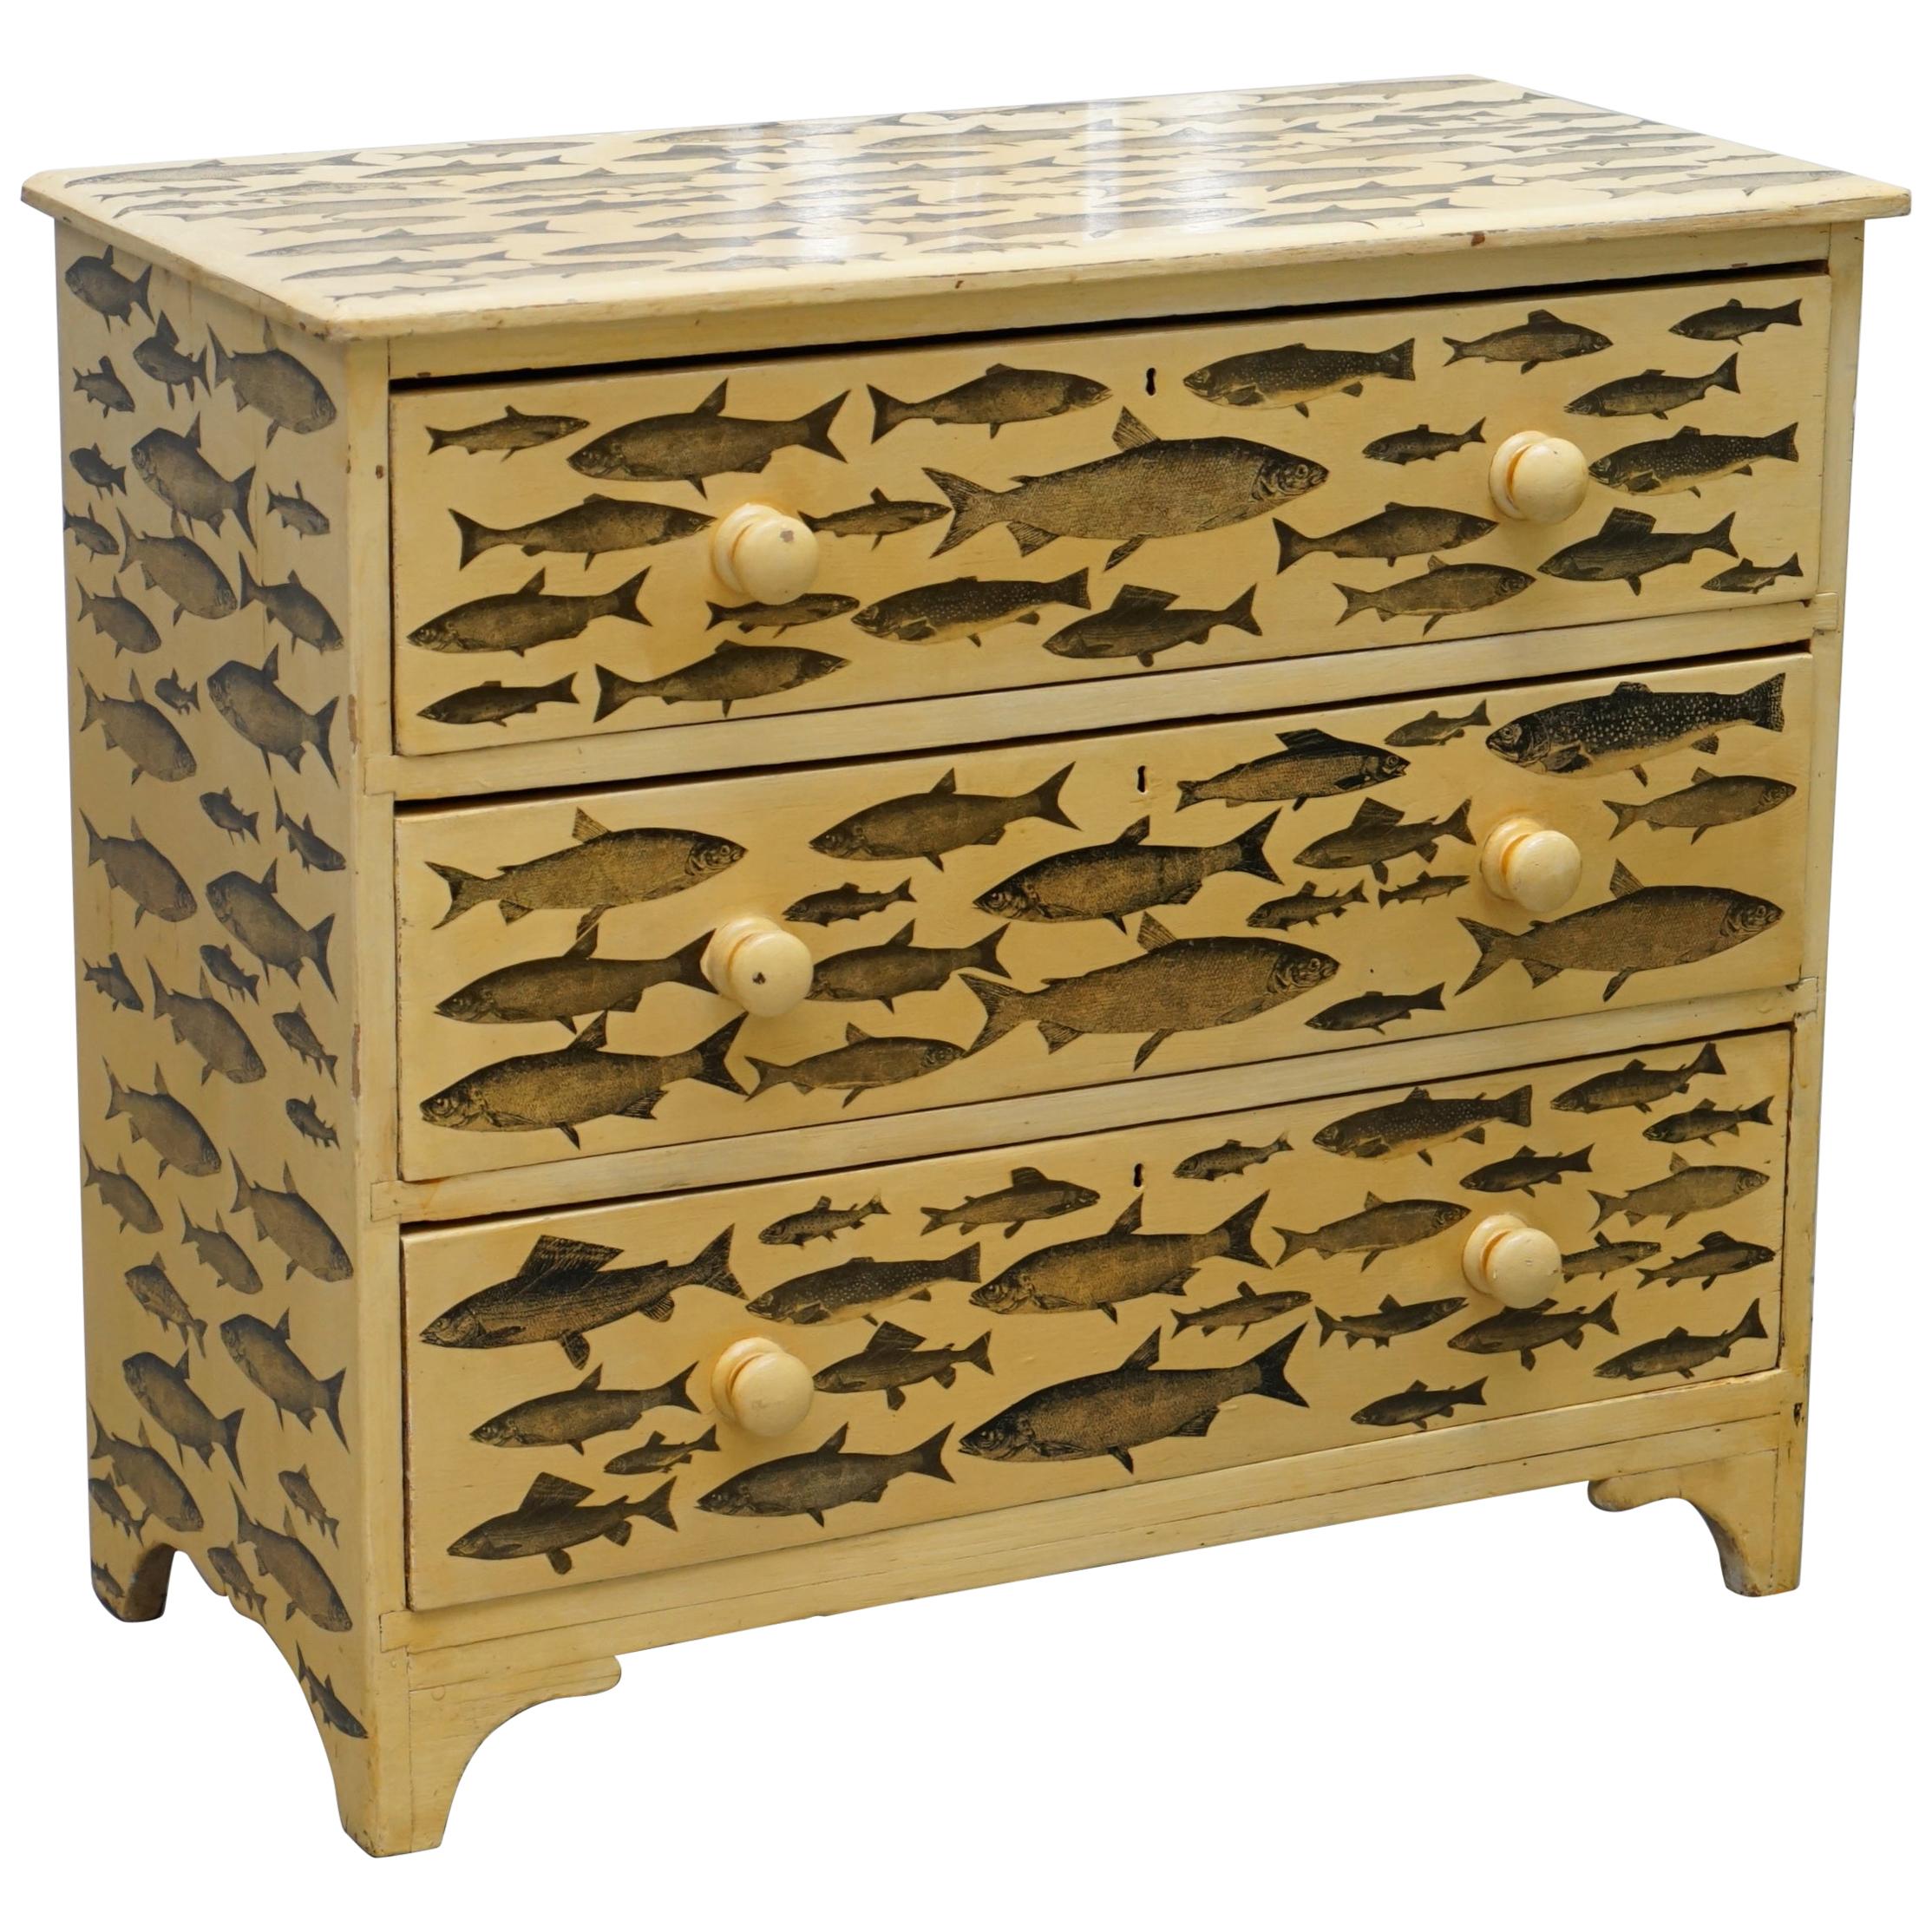 Stunning Liberty's London Fish Decoupage Victorian Chest of Drawers Lovely Size